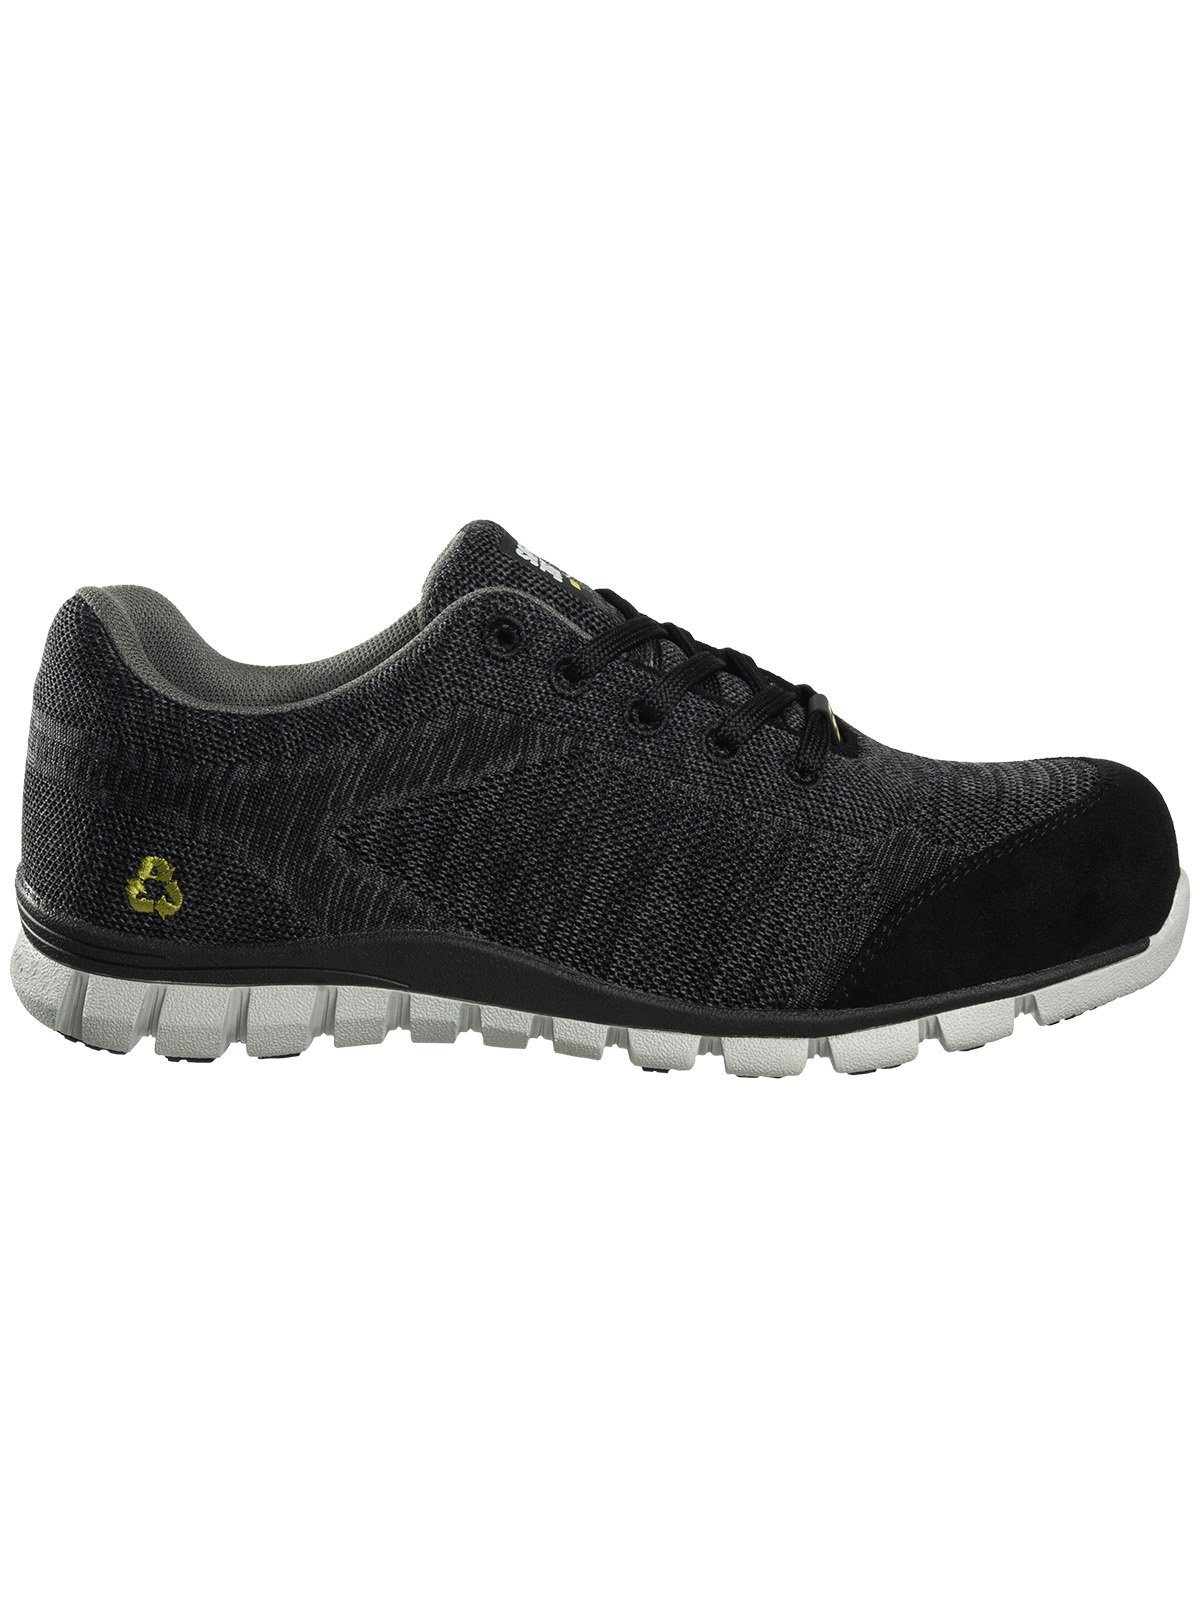 Arbeitsschuh S1P Safety SafetyJogger Morris Jogger